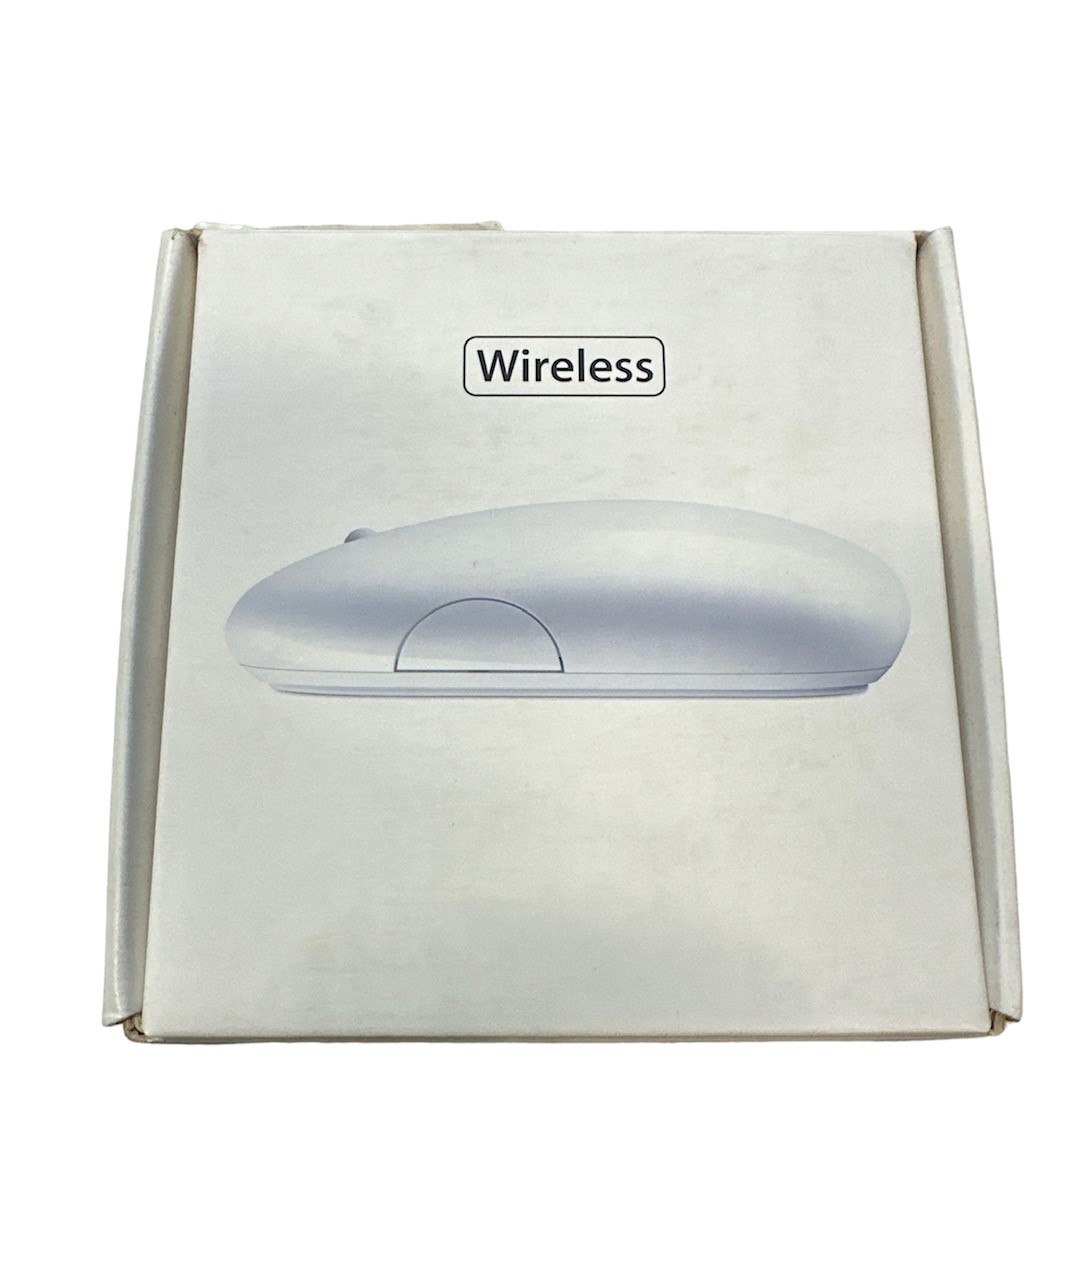 Apple Wireless Mighty Mouse - Boxed